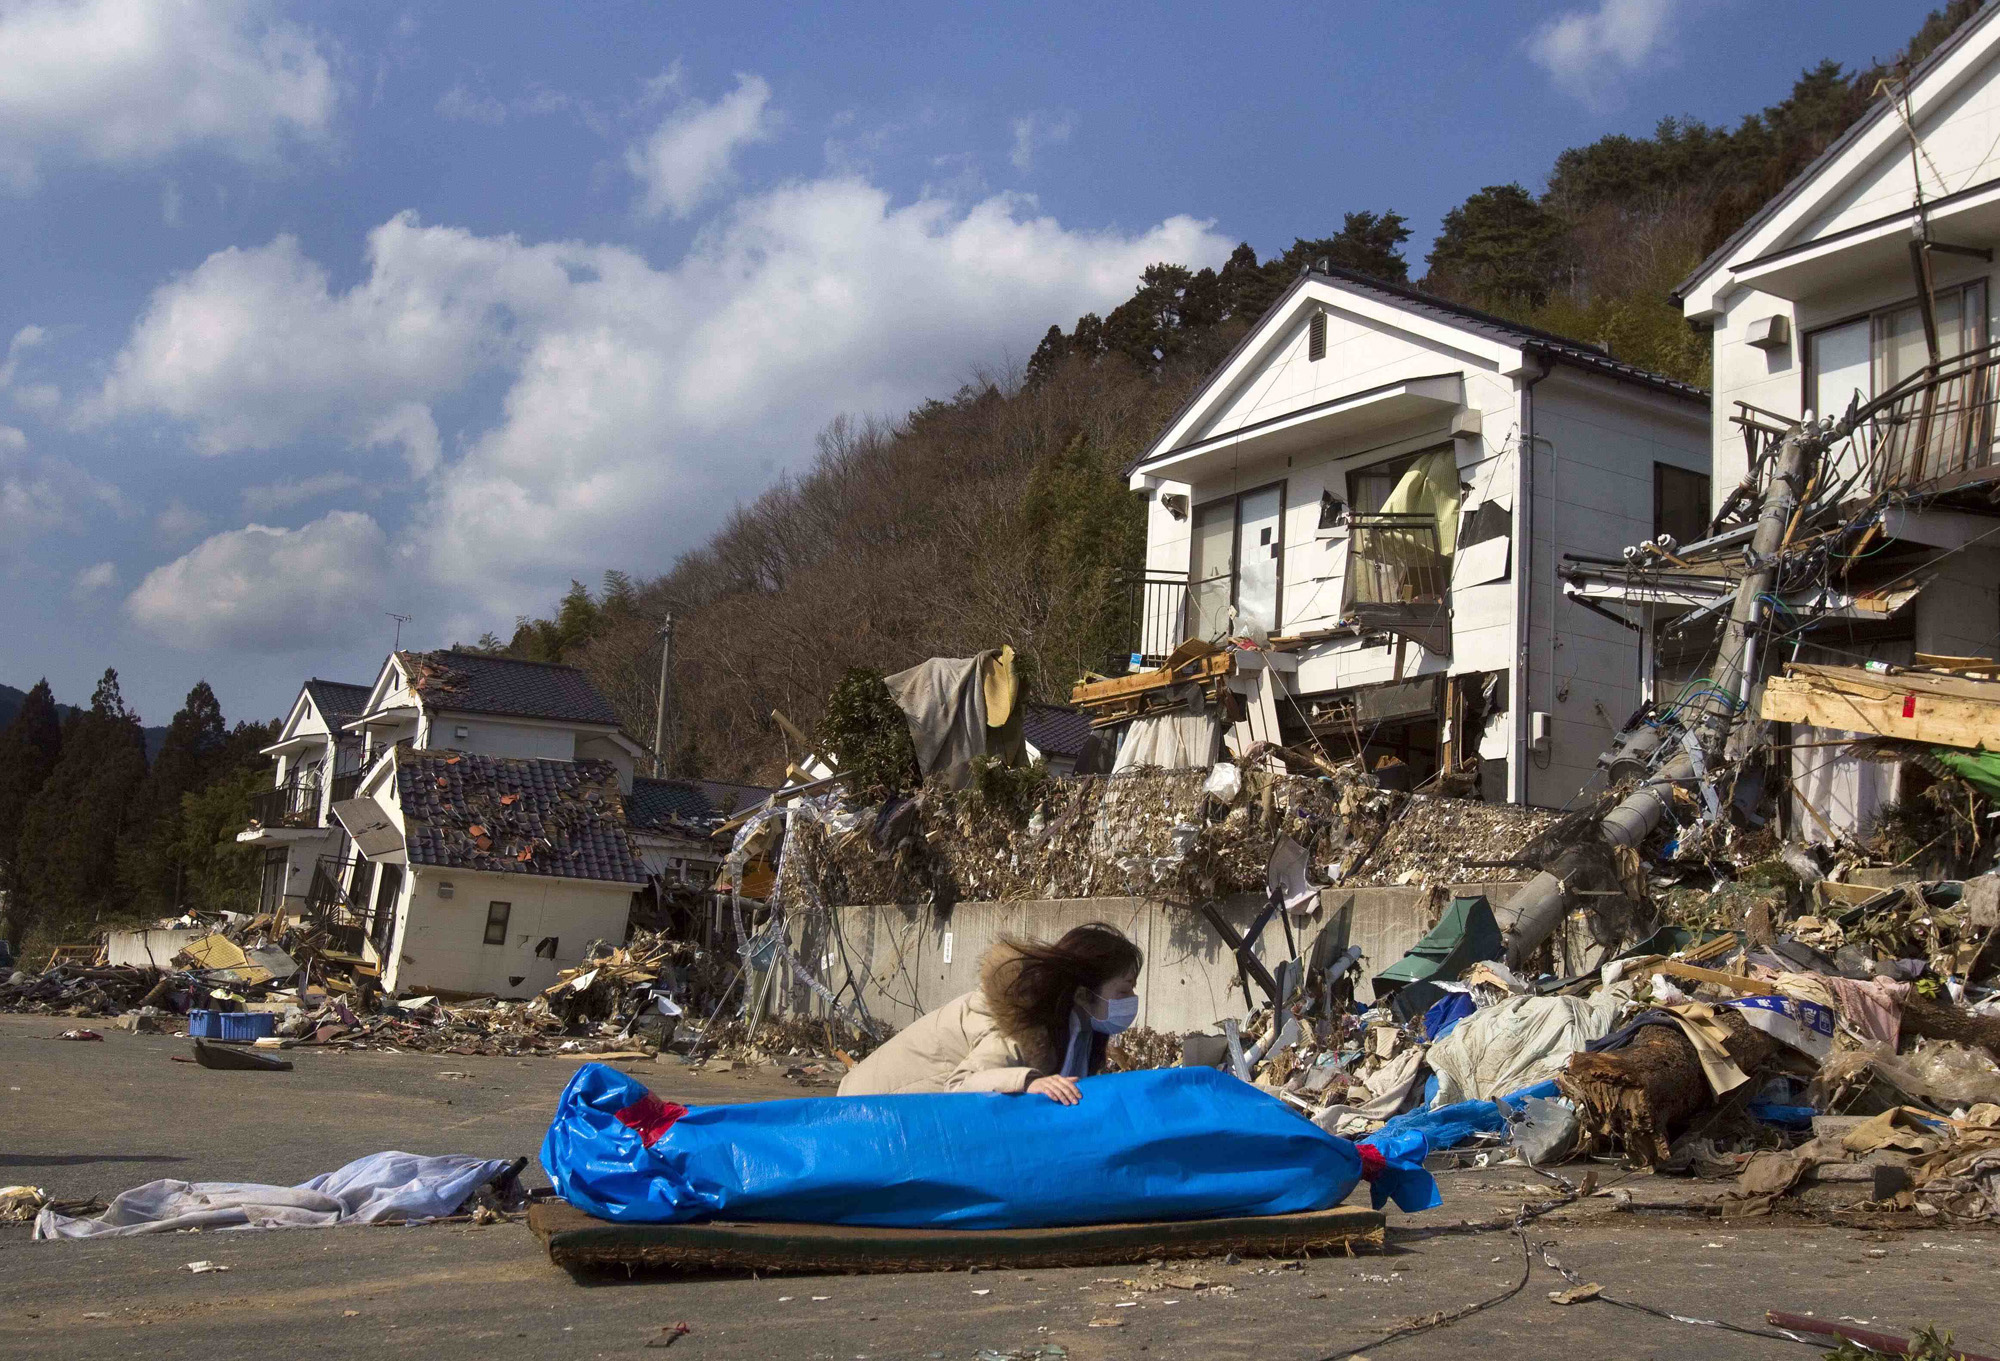 Tayo Kitamura, 40, kneels in the street to caress and talk to the wrapped body of her mother Kuniko Kitamura, 69, after Japanese firemen discovered the dead woman inside the ruins of her home in Onagawa, northeastern Japan, March 19, 2011.